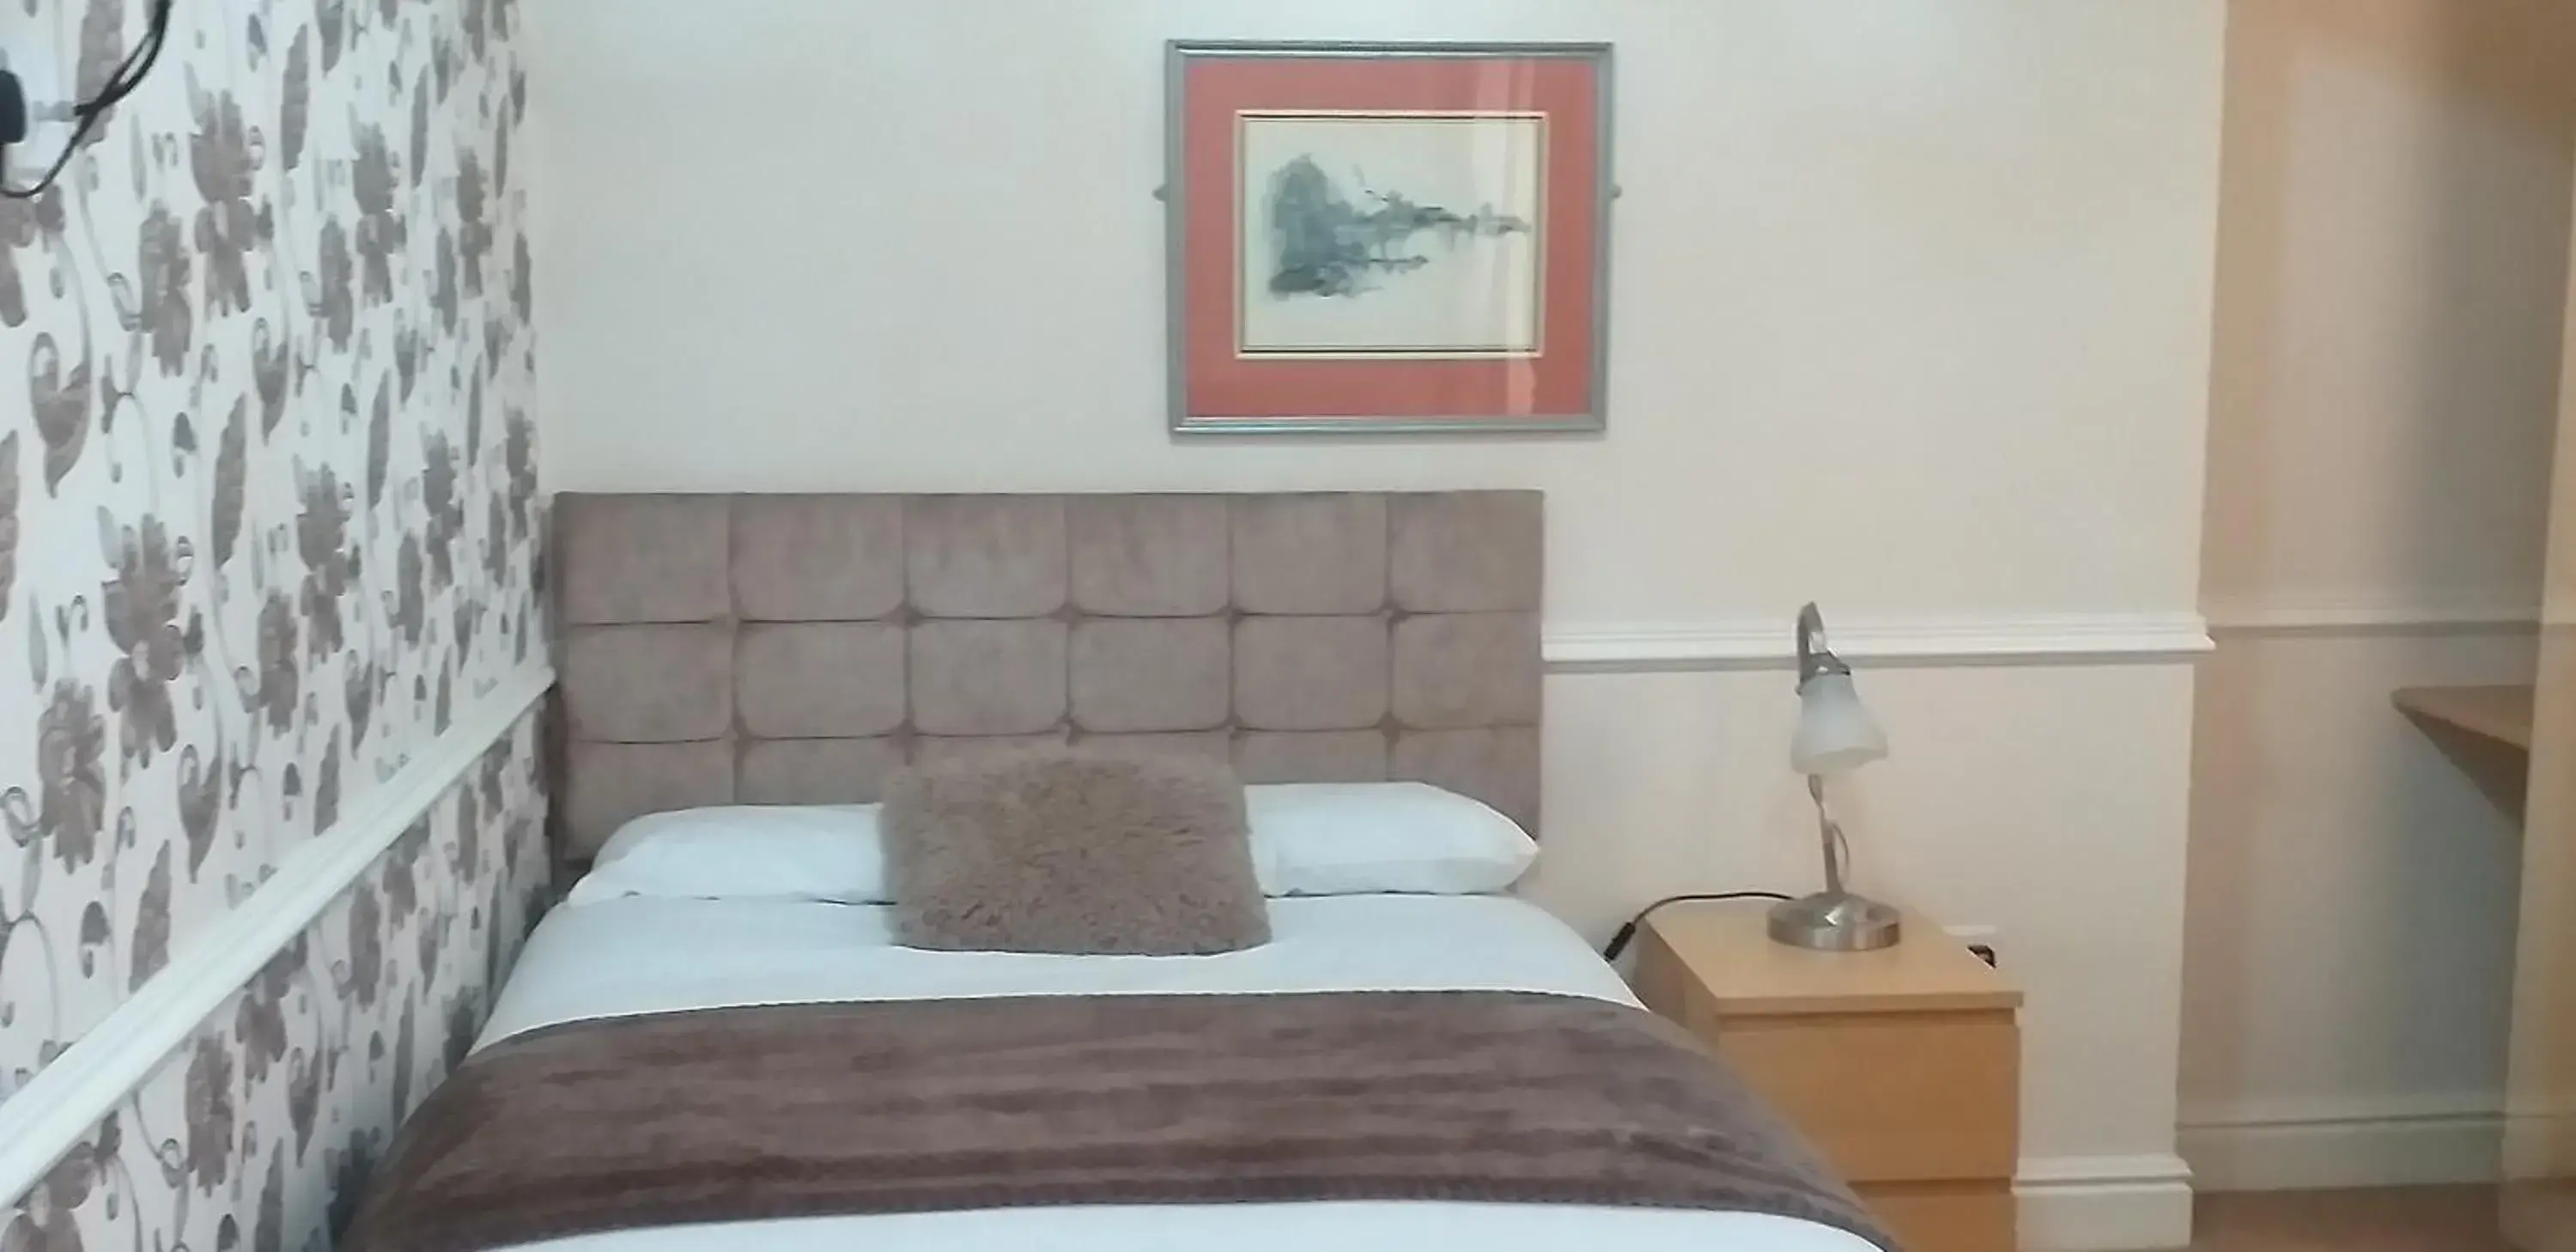 Bed in Surrey House Hotel